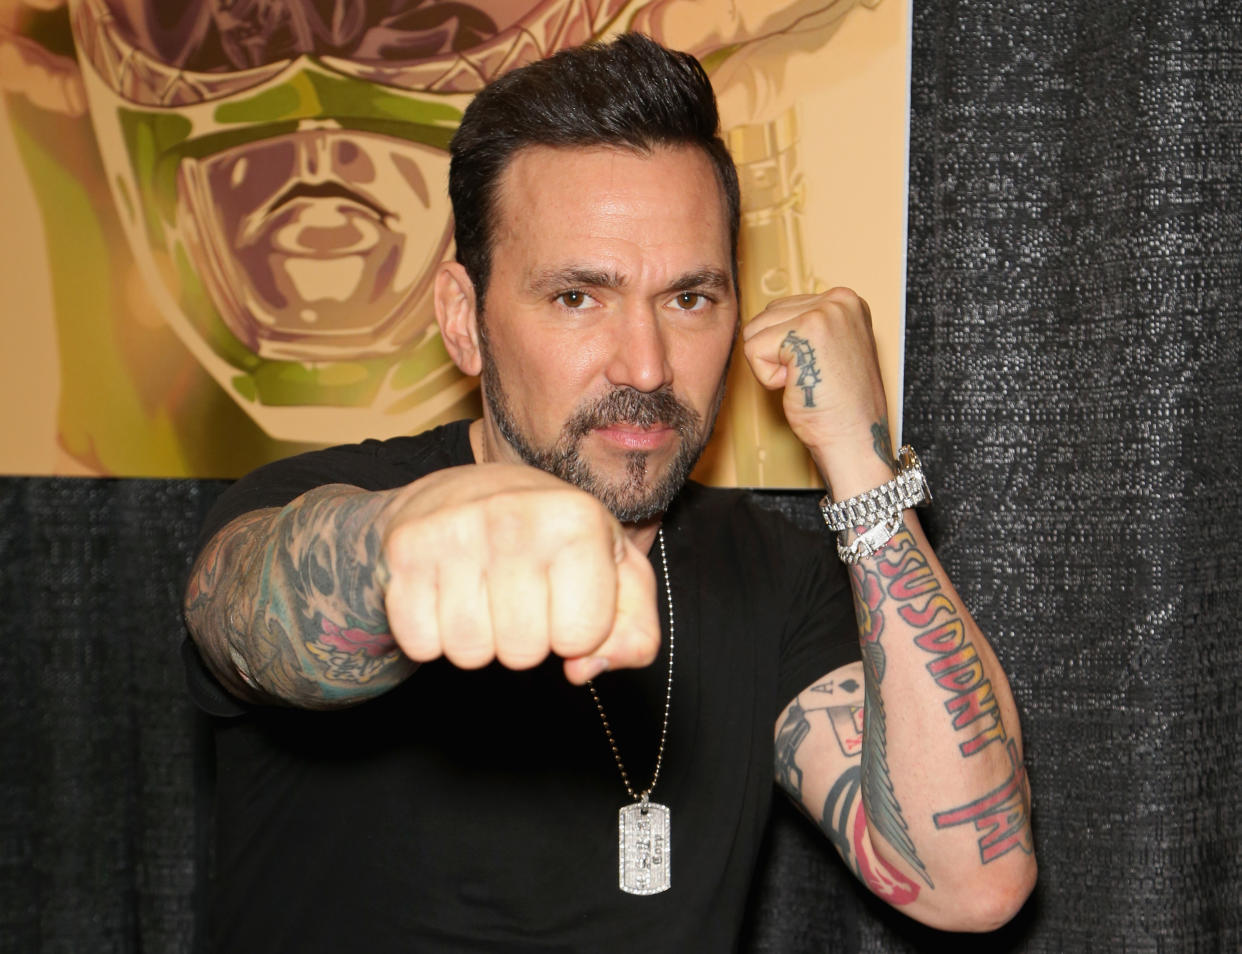 Power Rangers star and martial artist Jason David Frank has died at age 49. (Photo: Gabe Ginsberg/Getty Images)